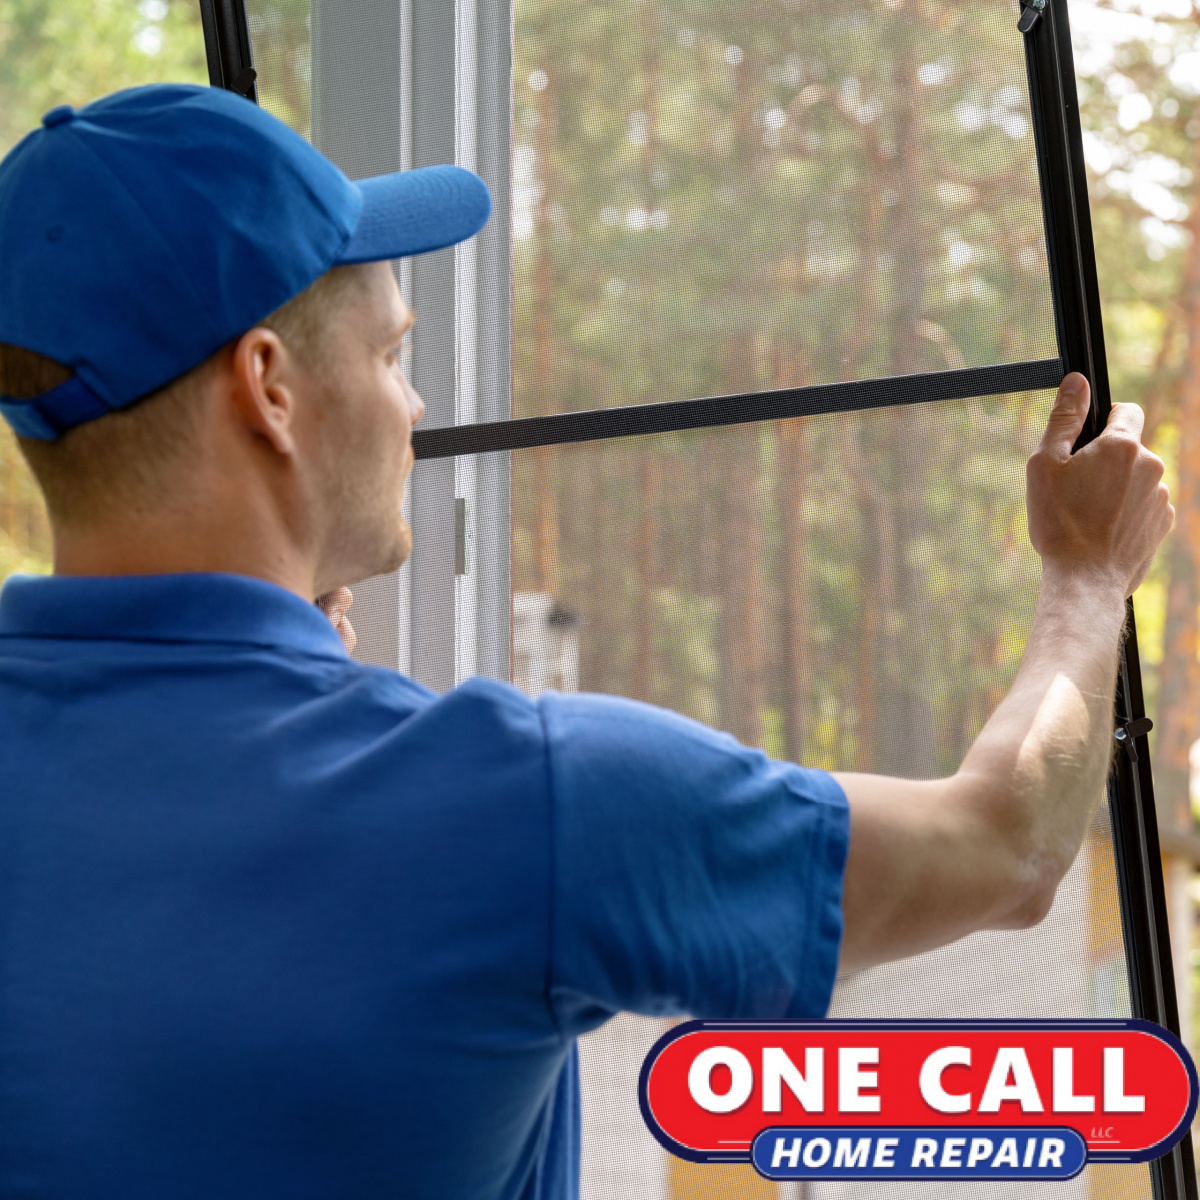 Enhance Your Home's Aesthetic with One Call Home Repair's Windows and Screen Installation Servic